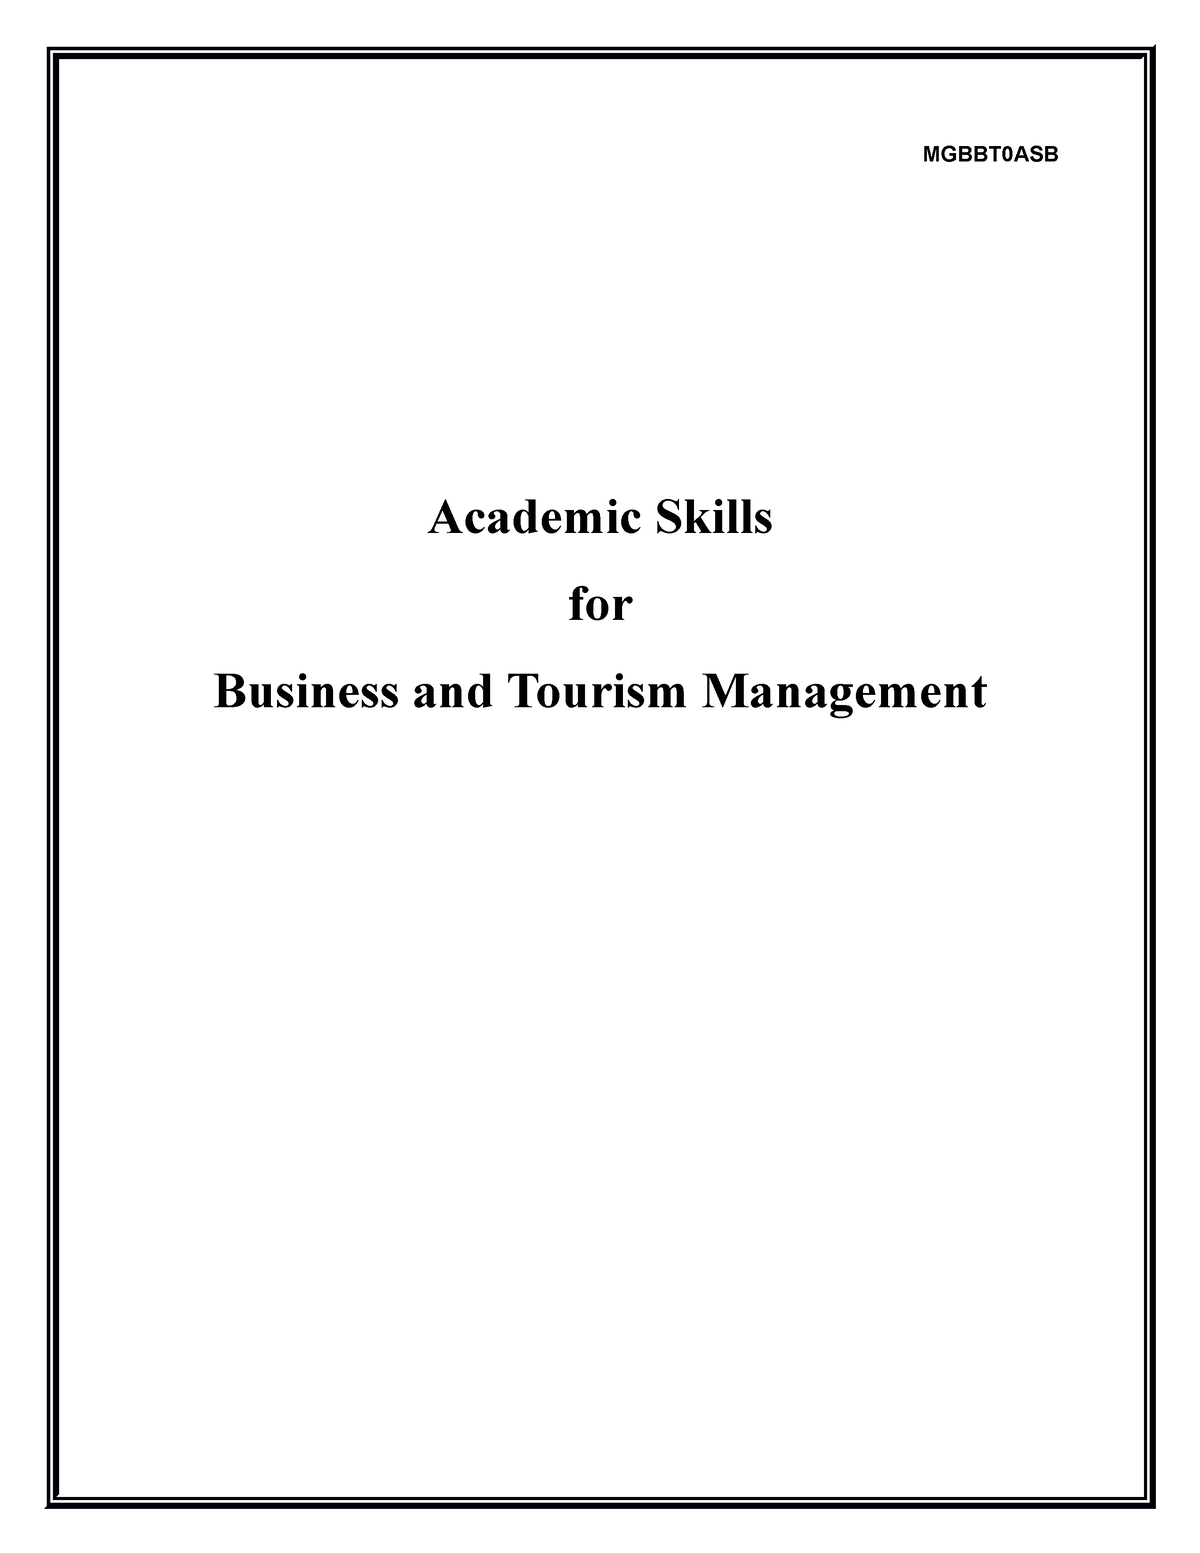 academic skills for business and tourism management essay